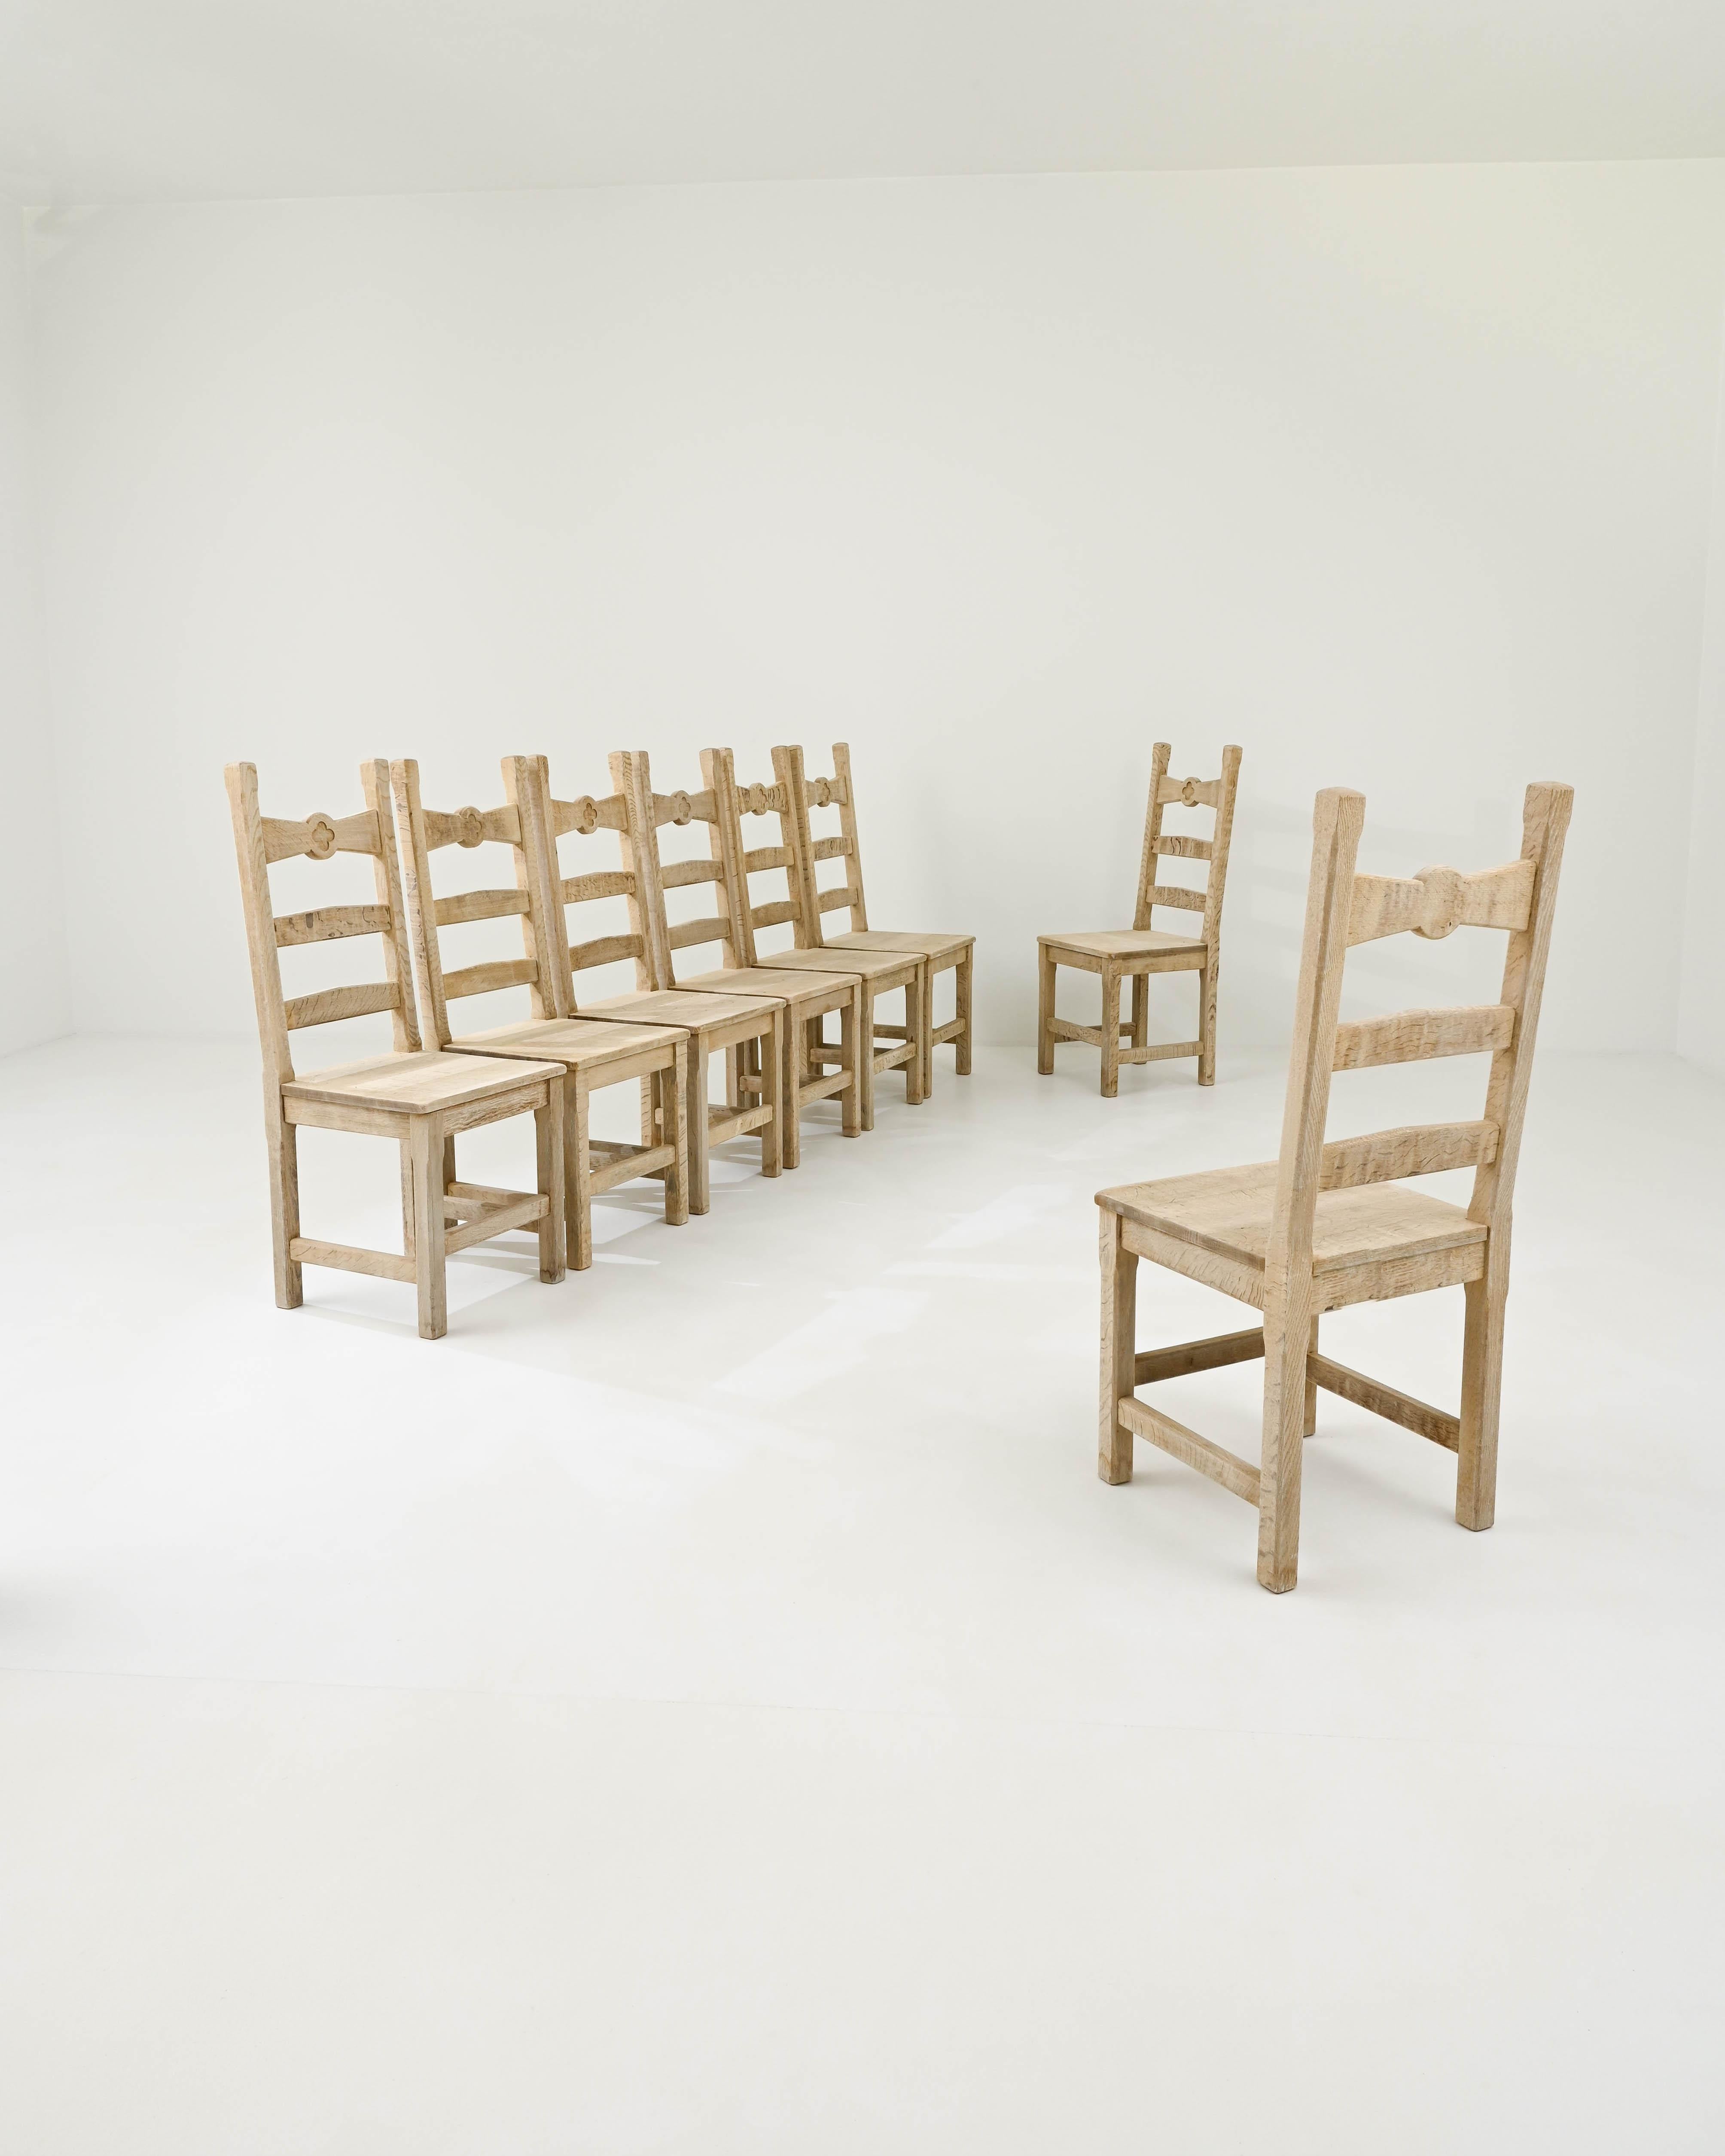 A set of oak dining chairs created in 20th Century Belgium. Silvery brown and mat hardwood composed into a thoughtful and utilitarian construction characterizes these chairs as a farmhouse style staple. Charming dowel rod pegs, carved seat backs,